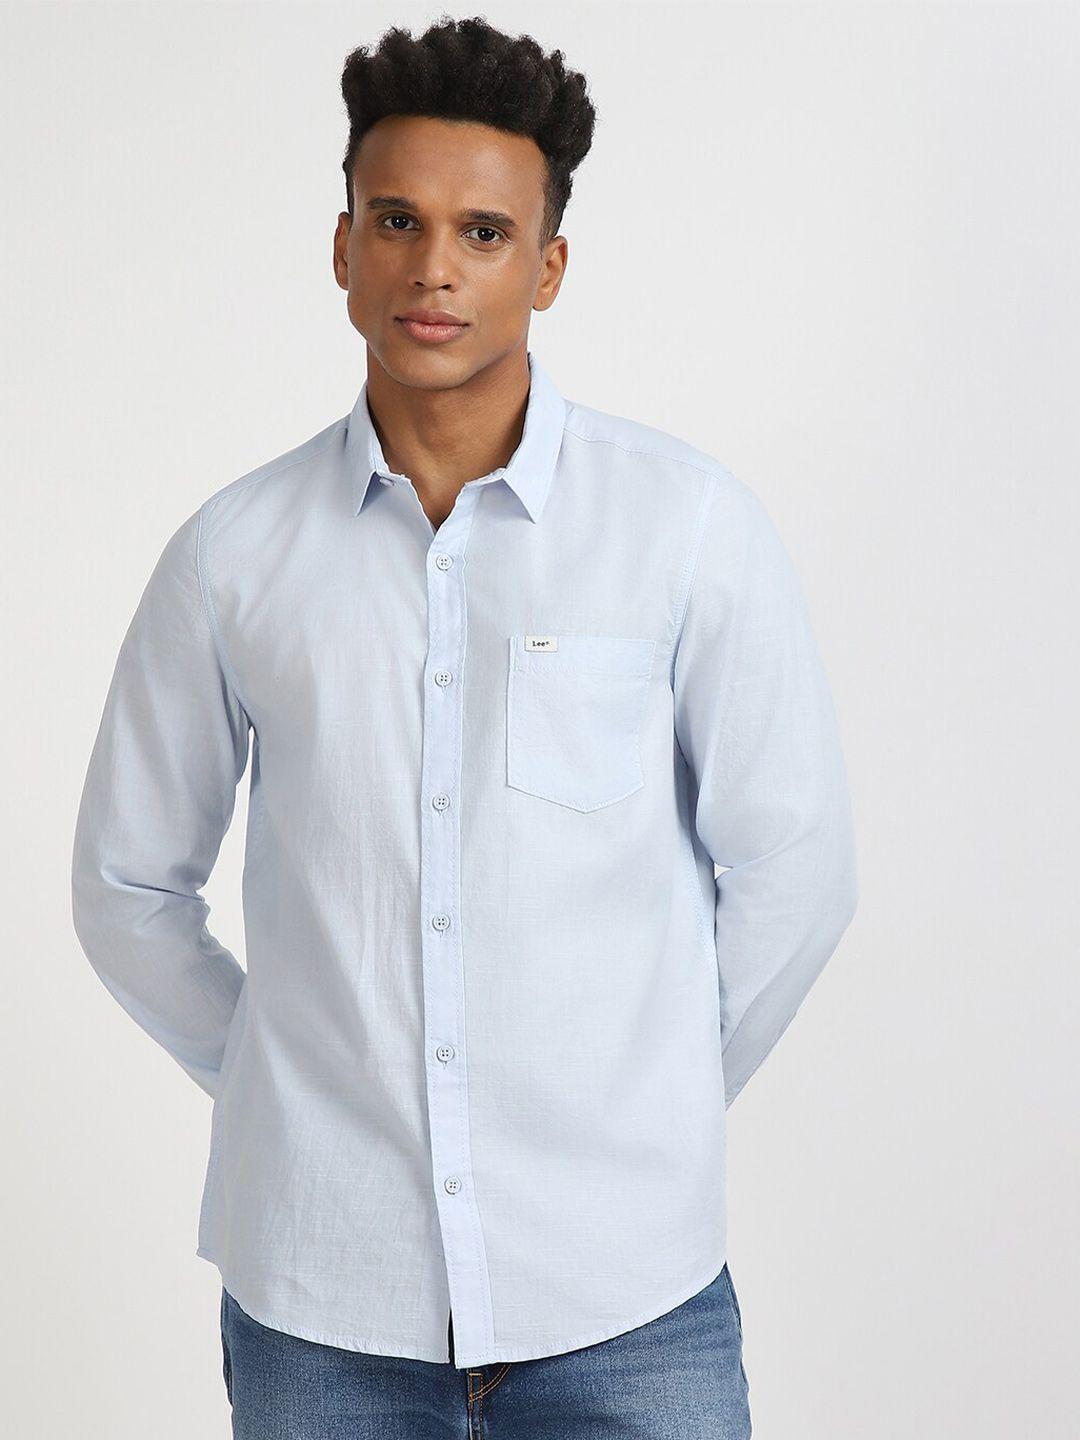 lee spread collar cotton casual slim fit shirt